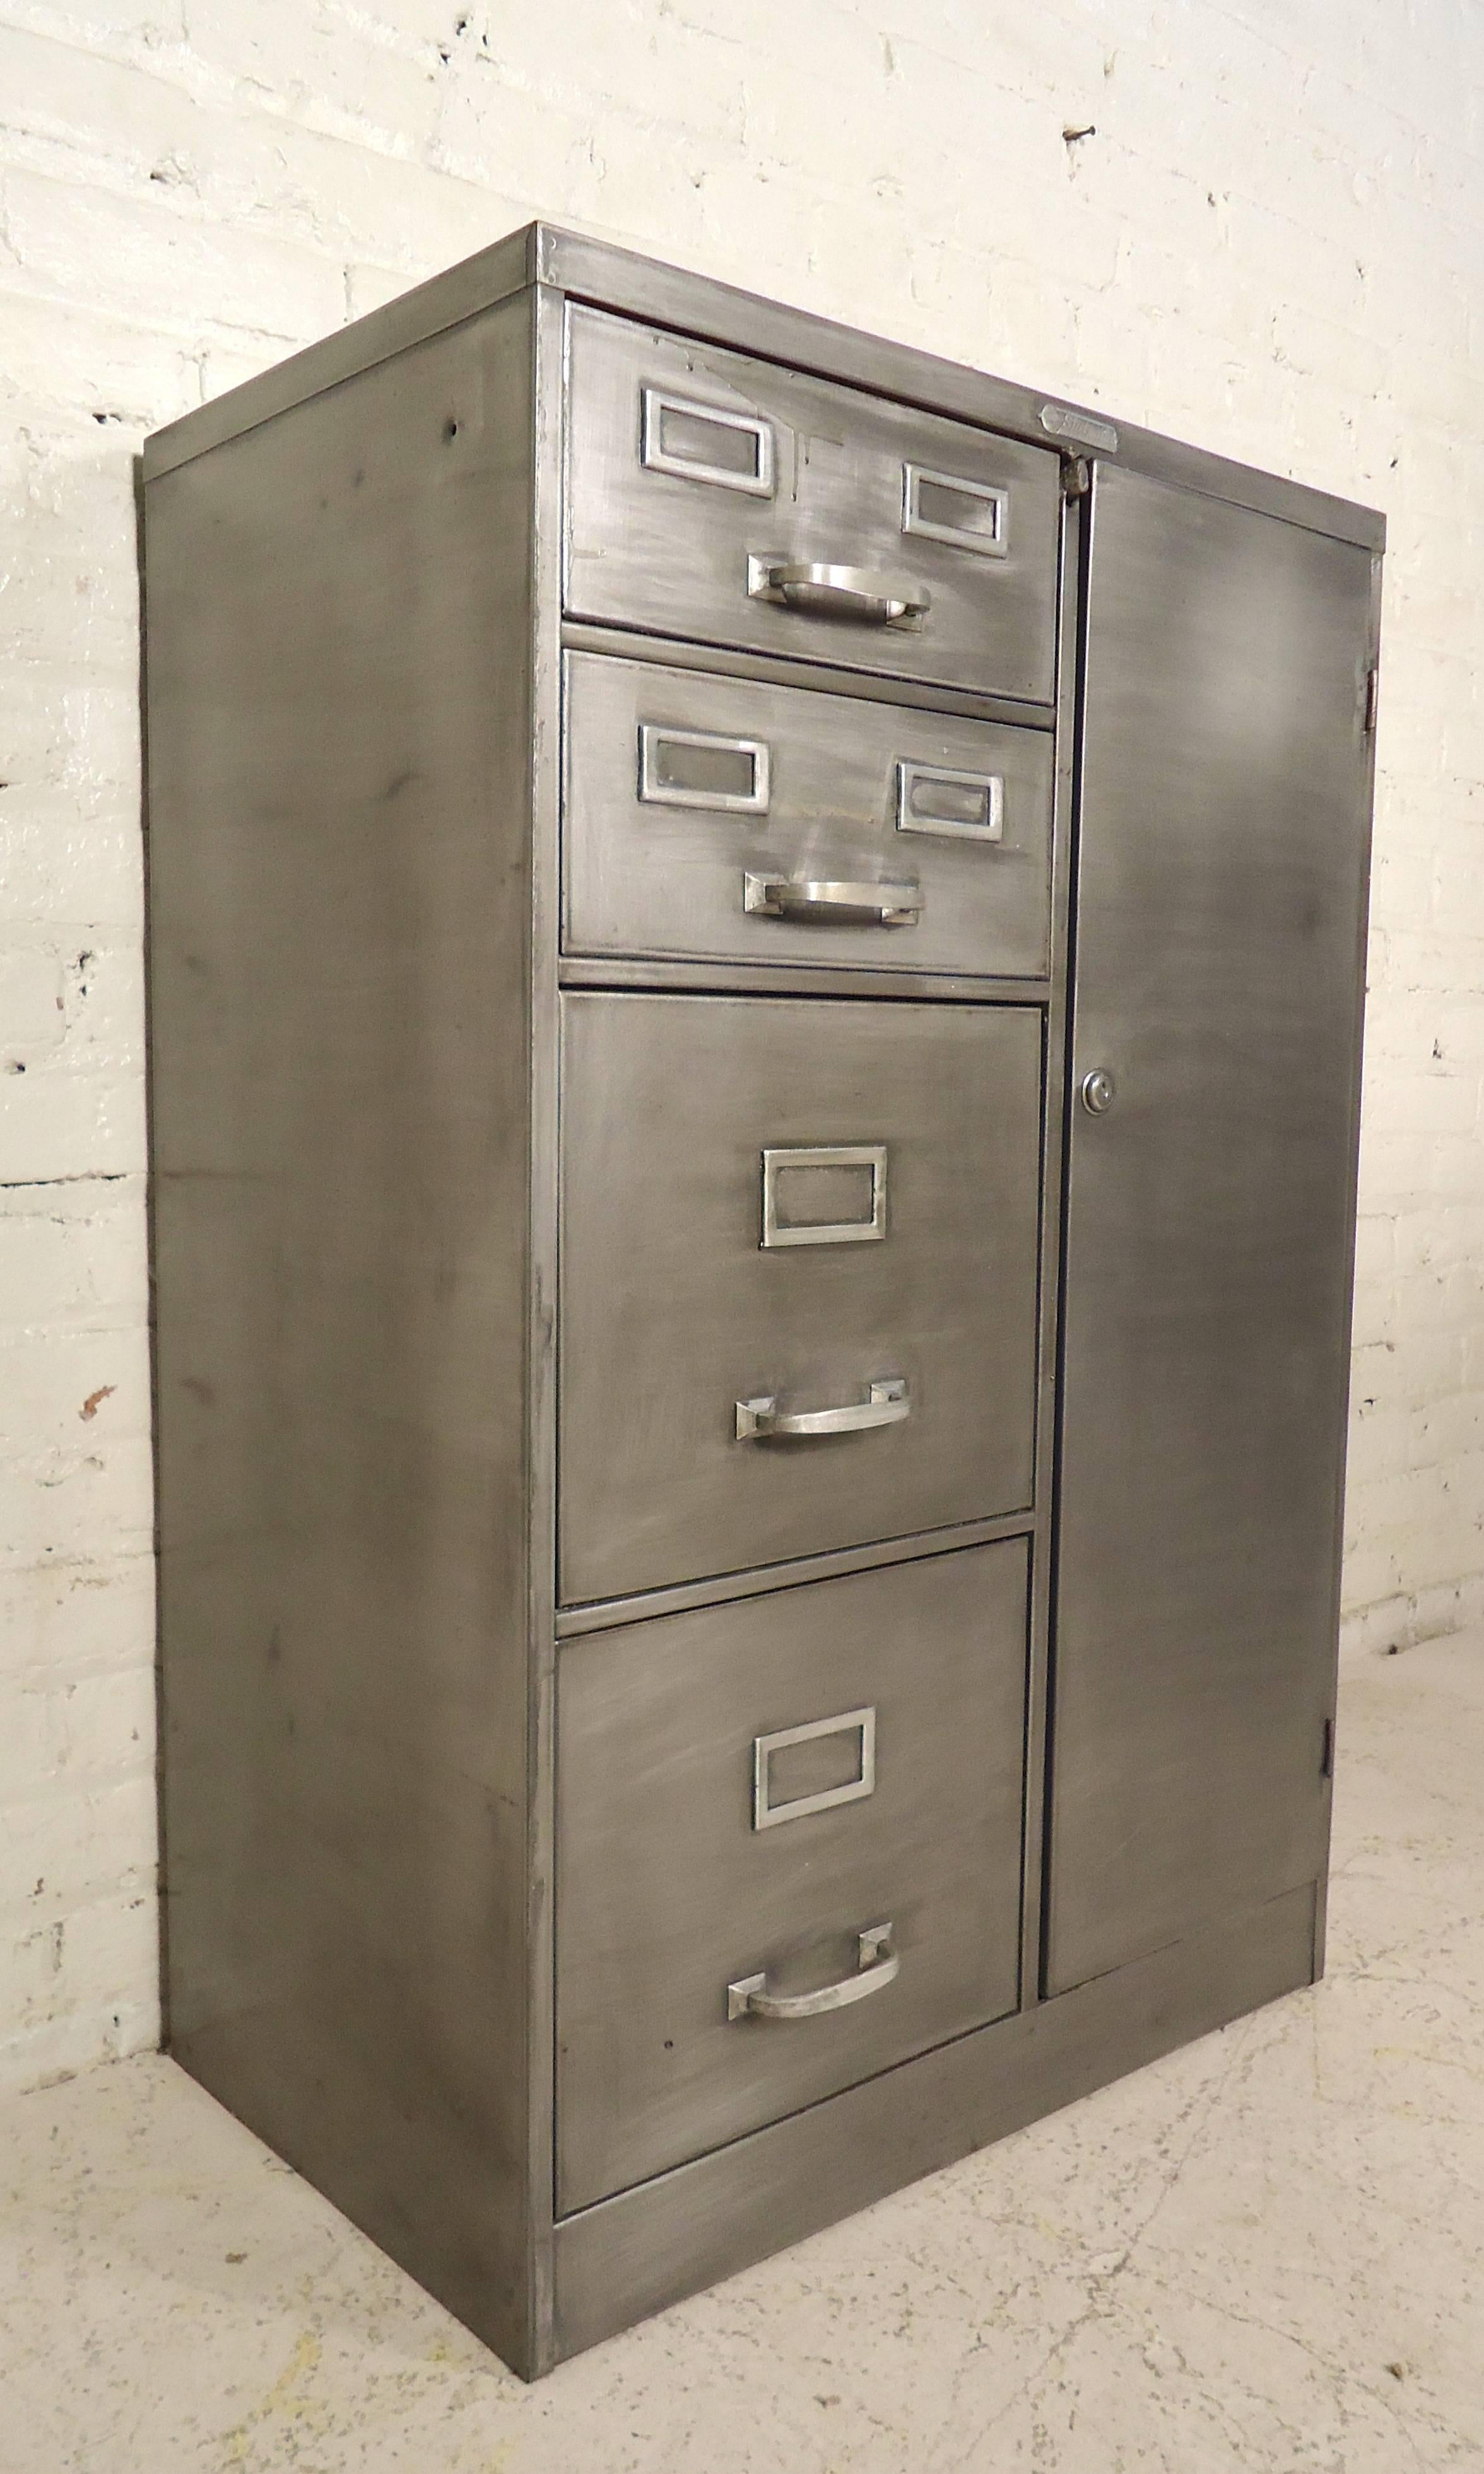 Restored metal cabinet with various units, including closed door storage. Heavy construction, refinished and perfect for home or office.

(Please confirm item location - NY or NJ - with dealer)
 